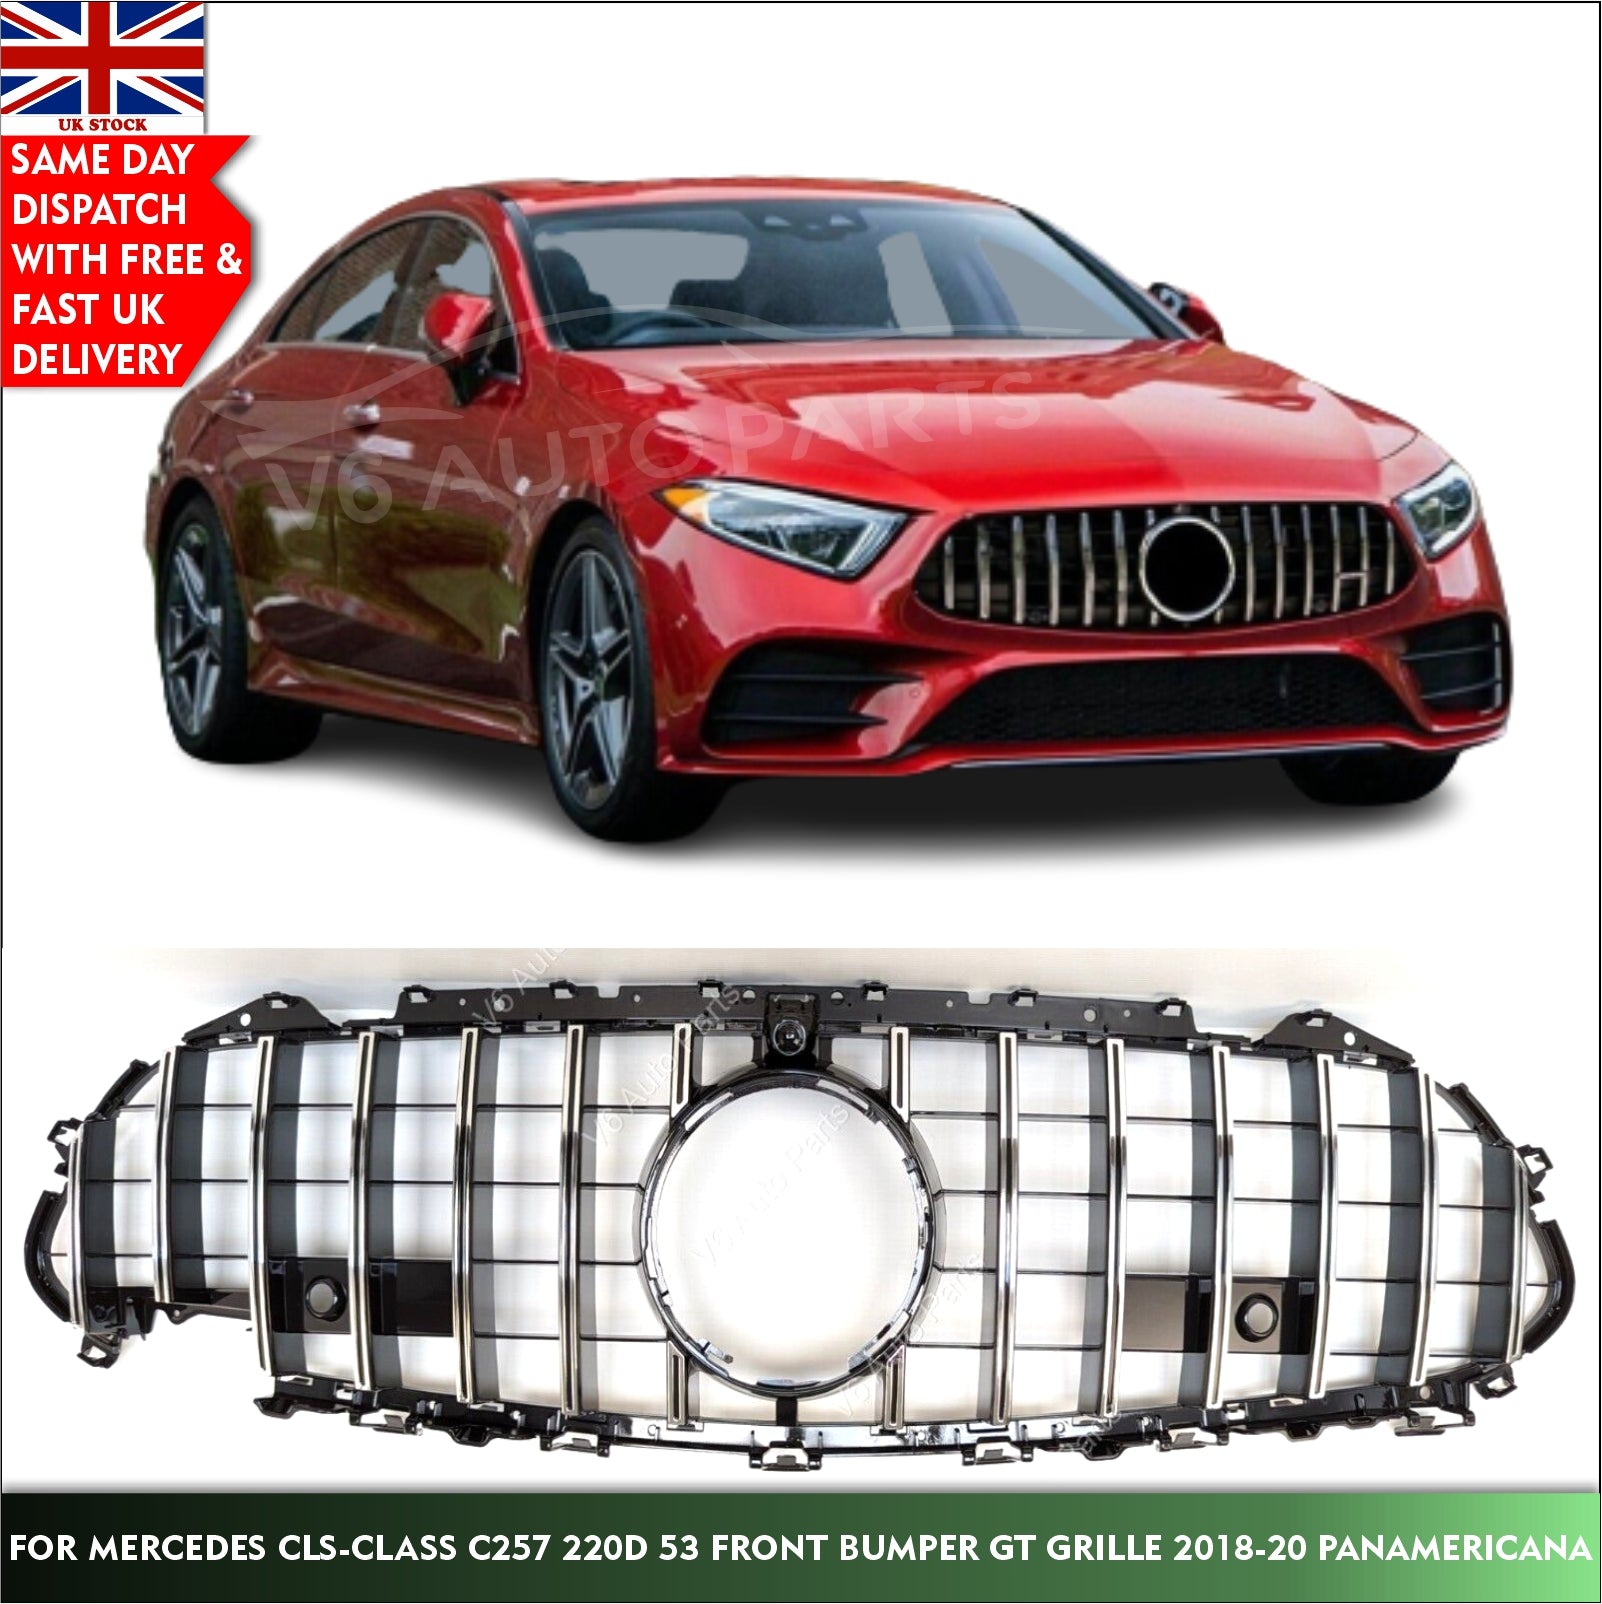 For Mercedes CLS-Class W257 CLS53 220 260 Front Bumper Grille 2018-2020 Panamericana